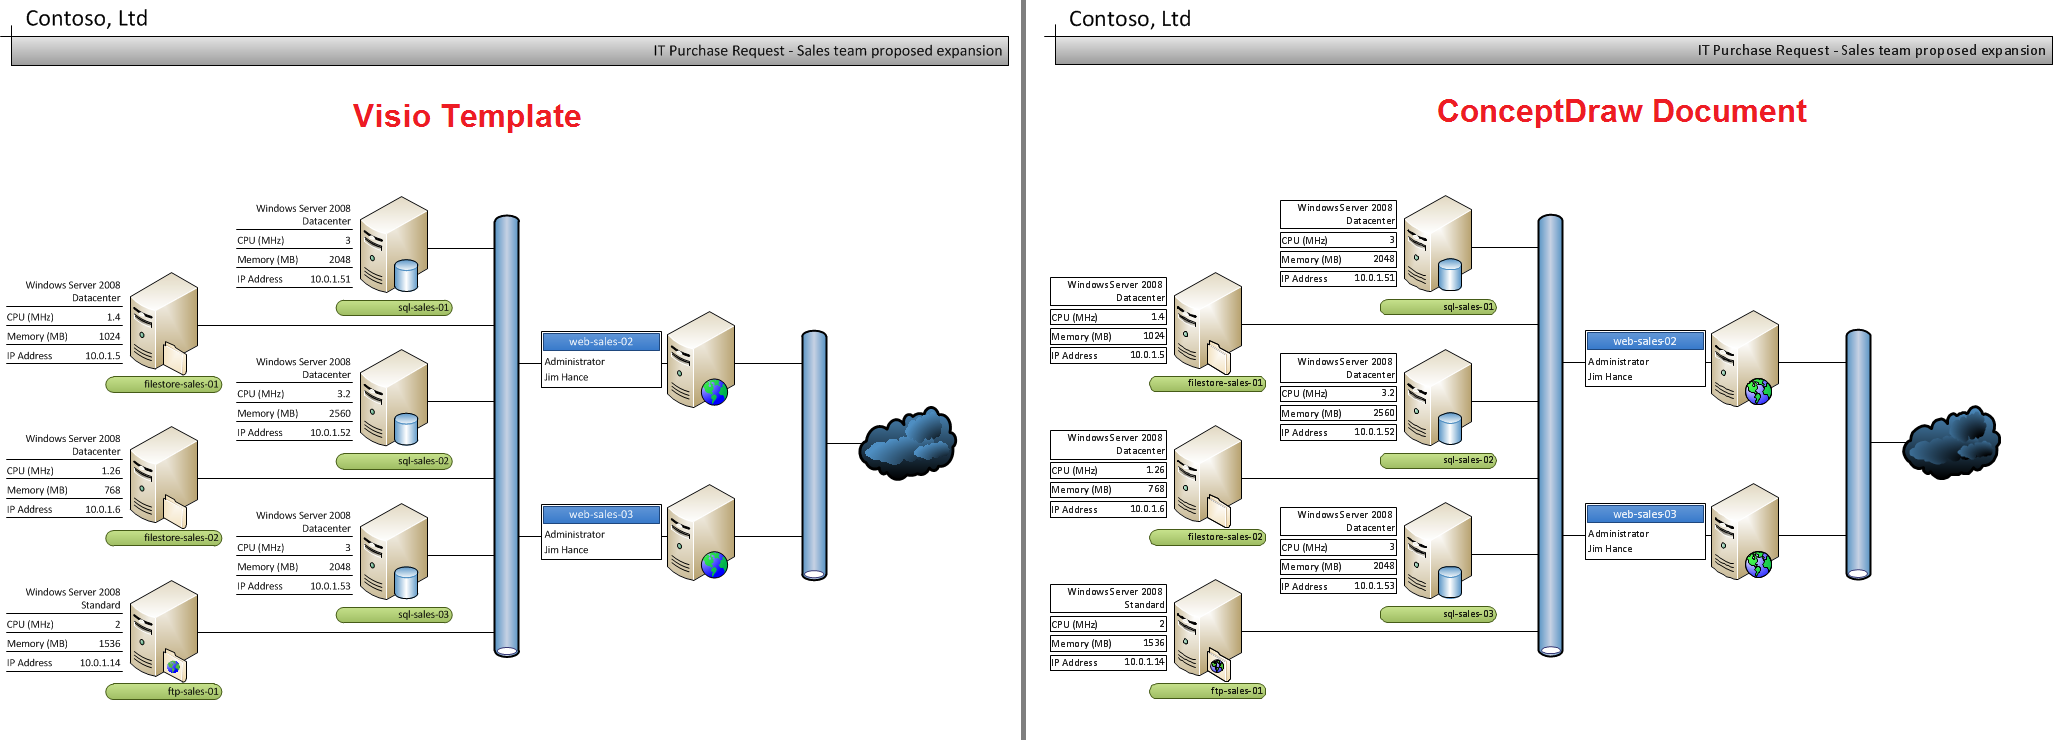 visio for mac active directory shapes